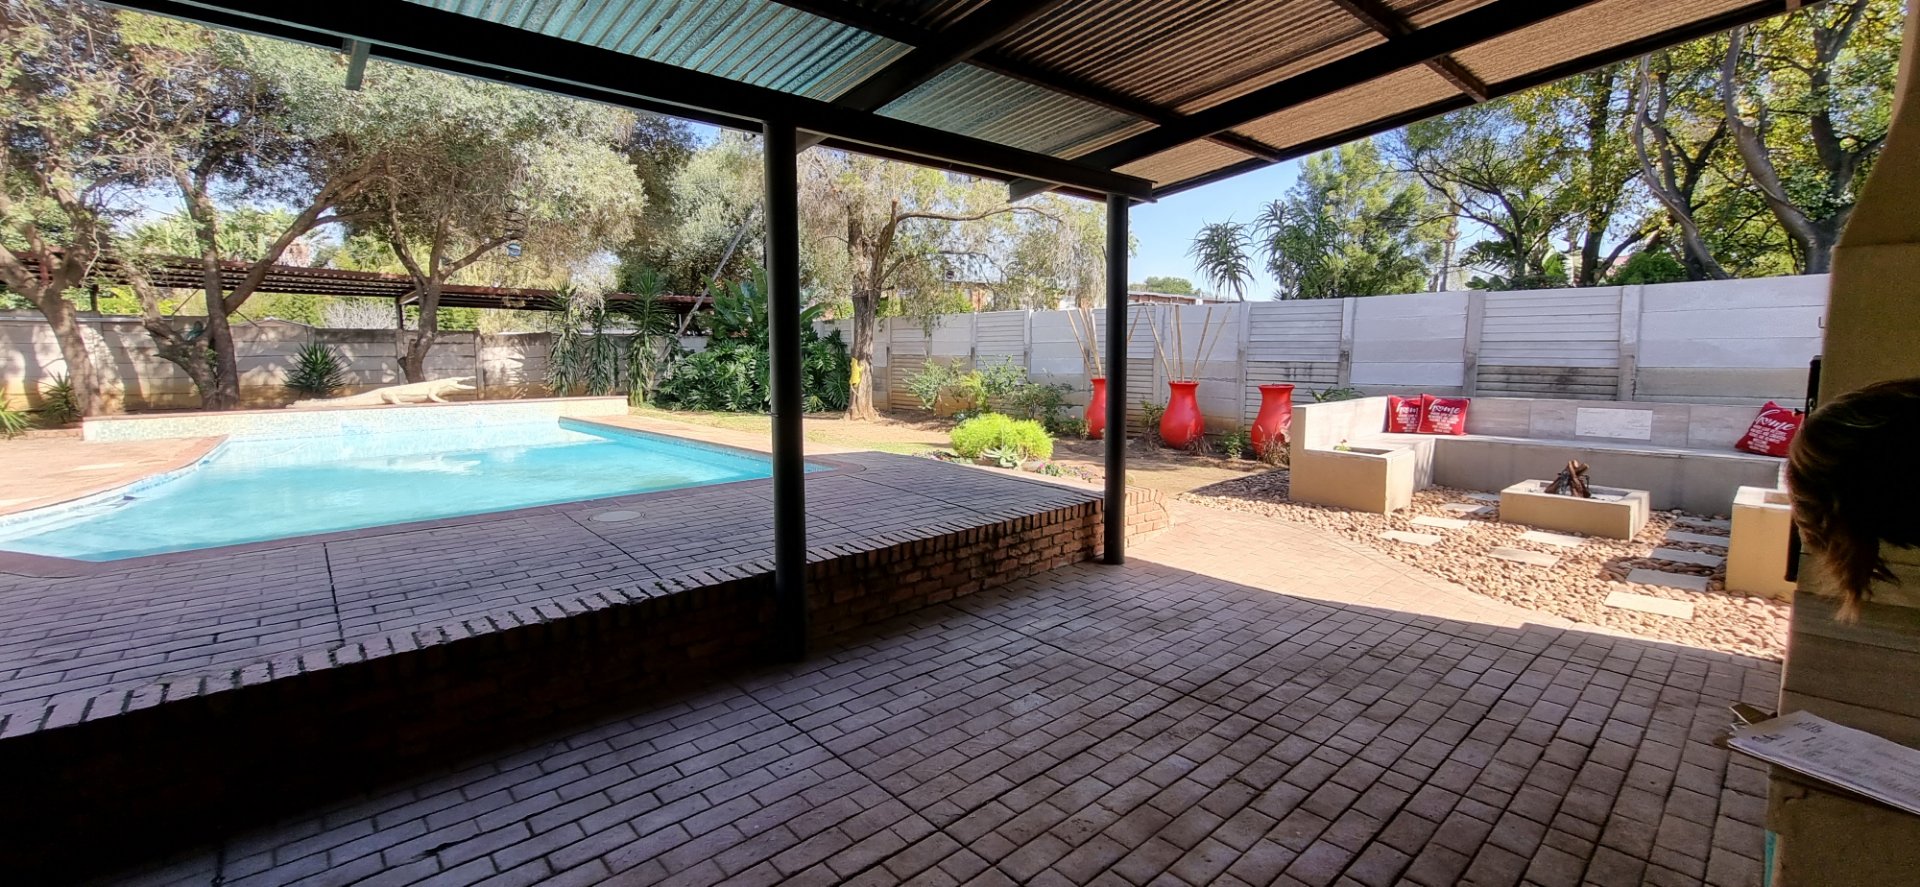 Entertainer's Dream & Large Family Home for Rent! Available 1 August 2022